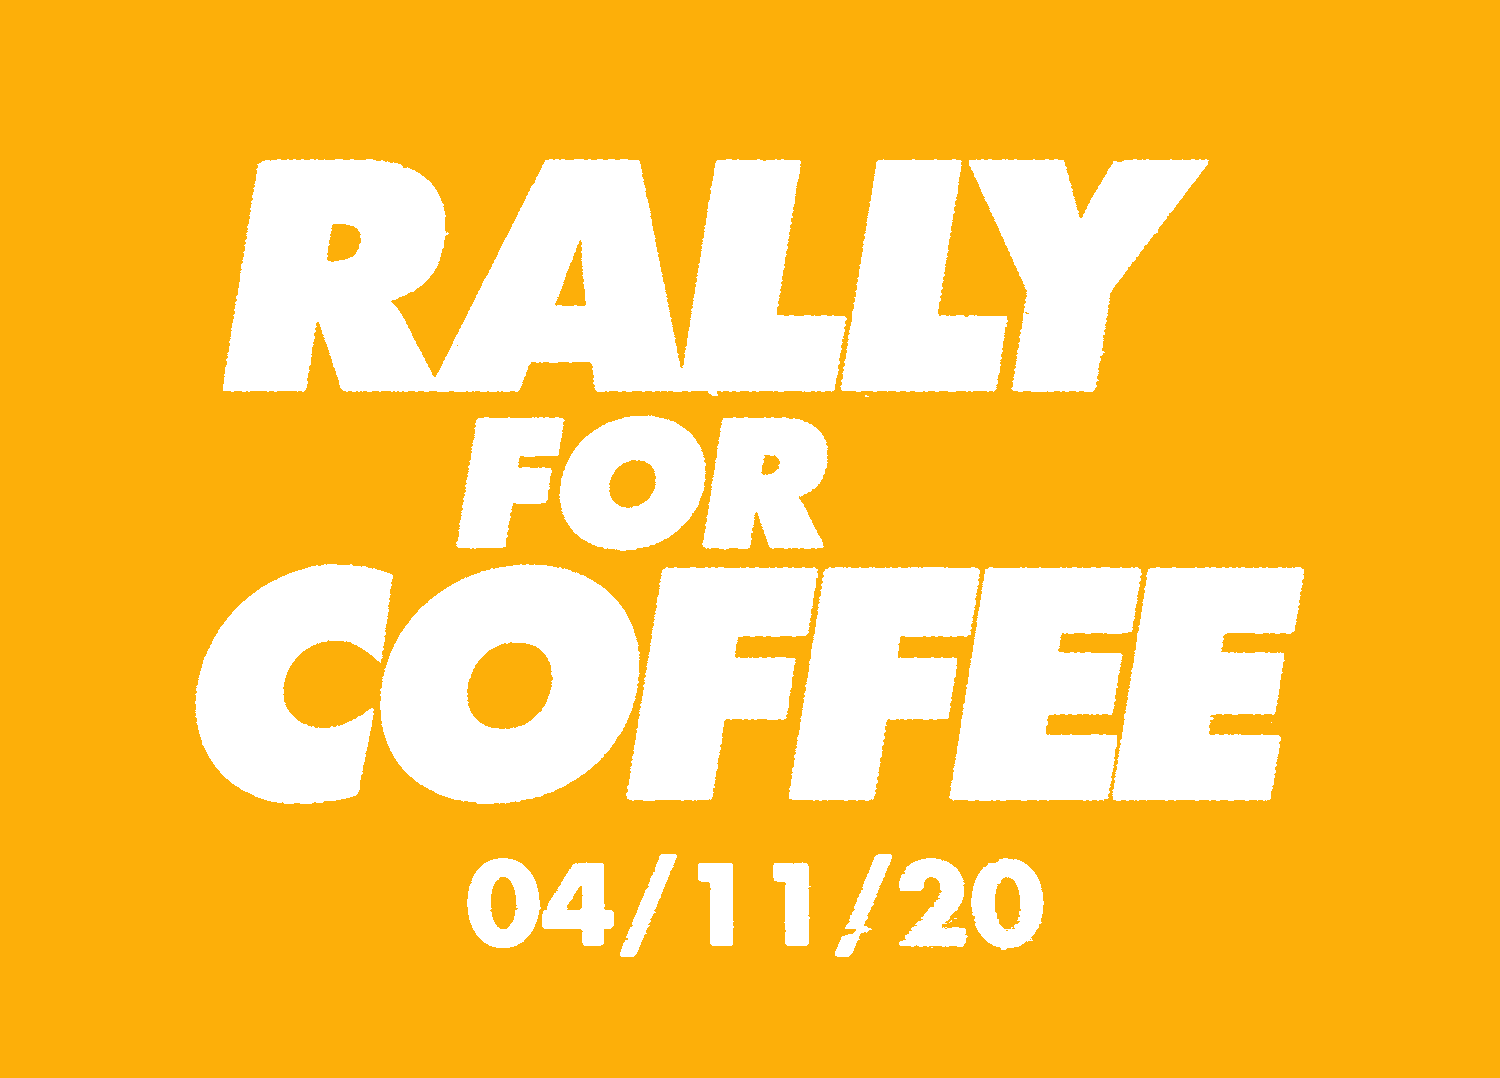 Everyone is Invited to #RallyForCoffee on Saturday, April 11